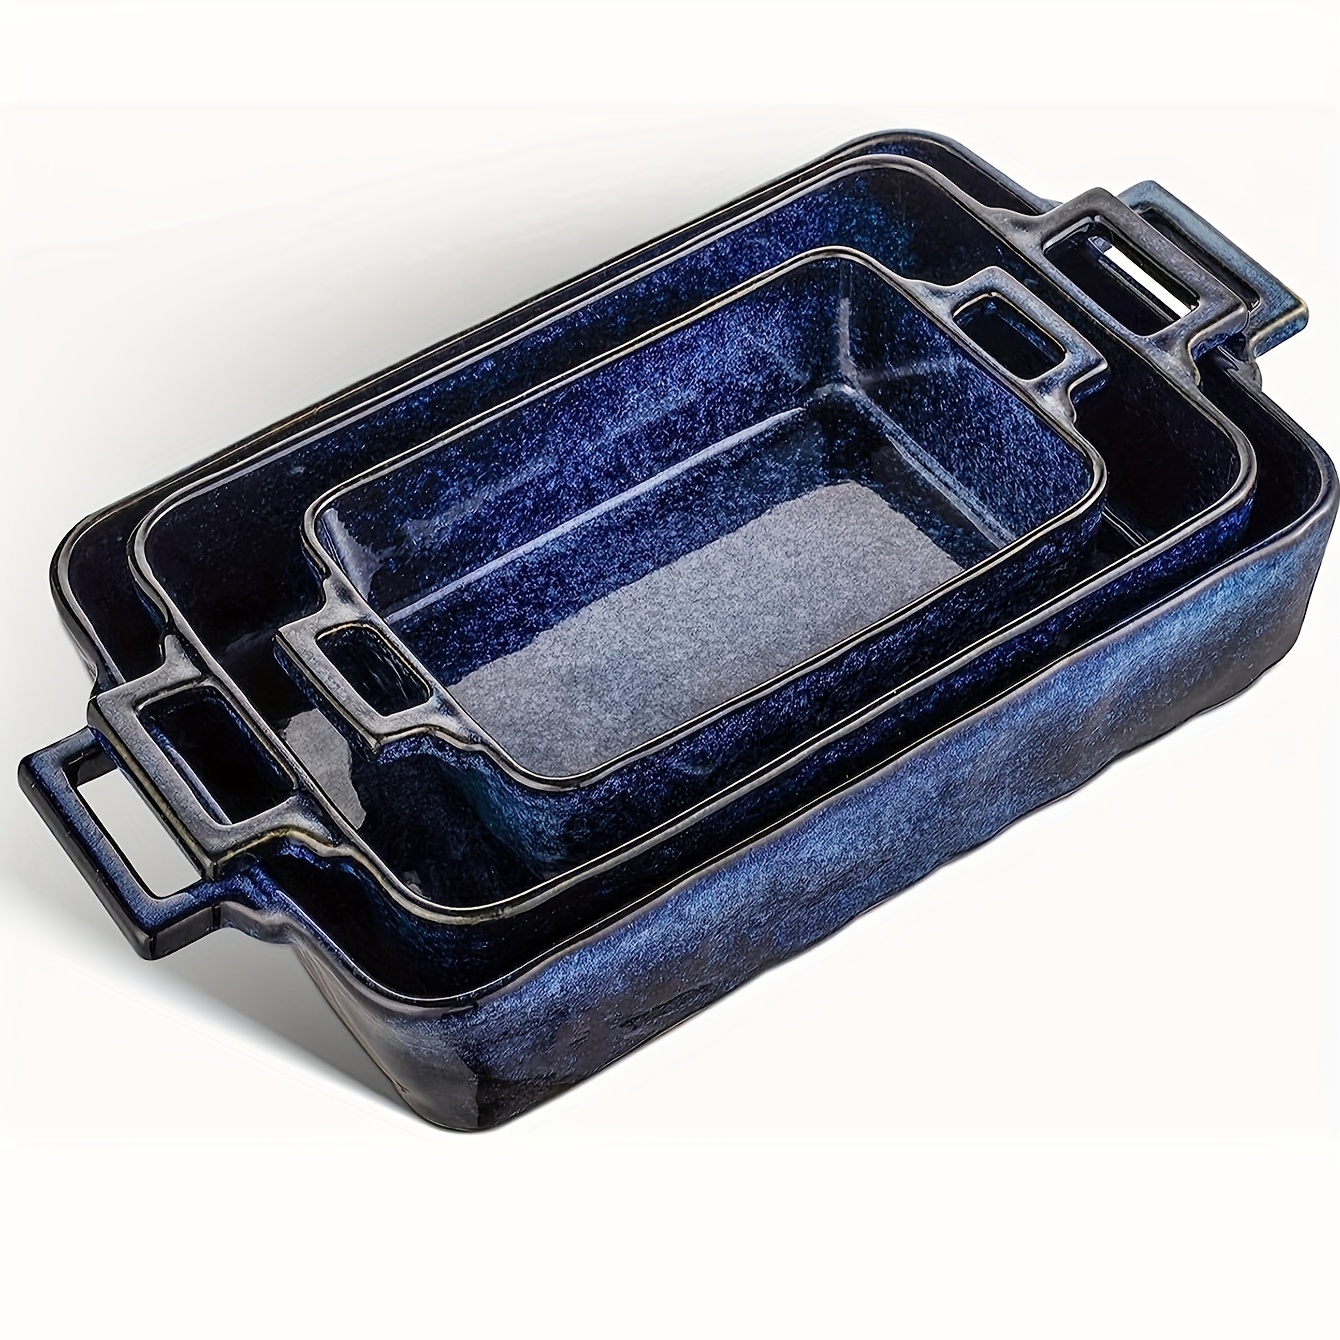 

3 Pcs, Vicrays Ceramic Bakeware Set, Porcelain Rectangular Lasagna Pans Casserole Dish Set For Kitchen, Cooking, Baking, Cake Dinner, Banquet And Daily Use, 15 X 8.5 Inches (blue)